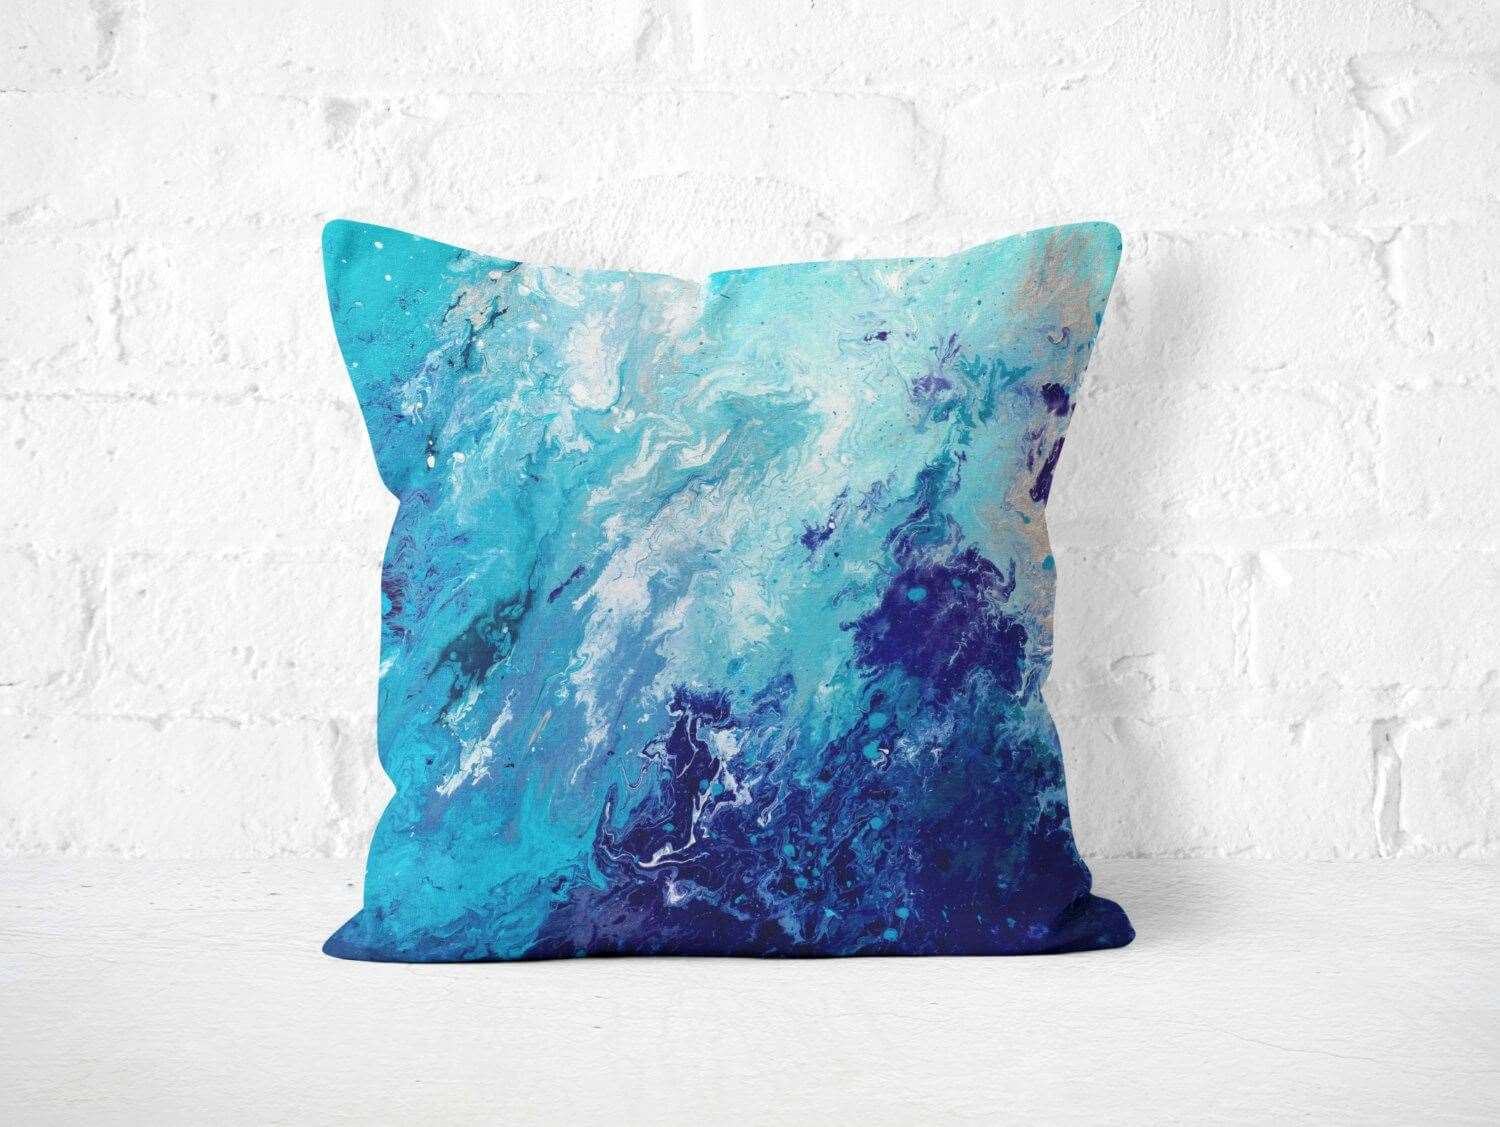 'Drift Away' Blue Square Pillow - Louise Mead